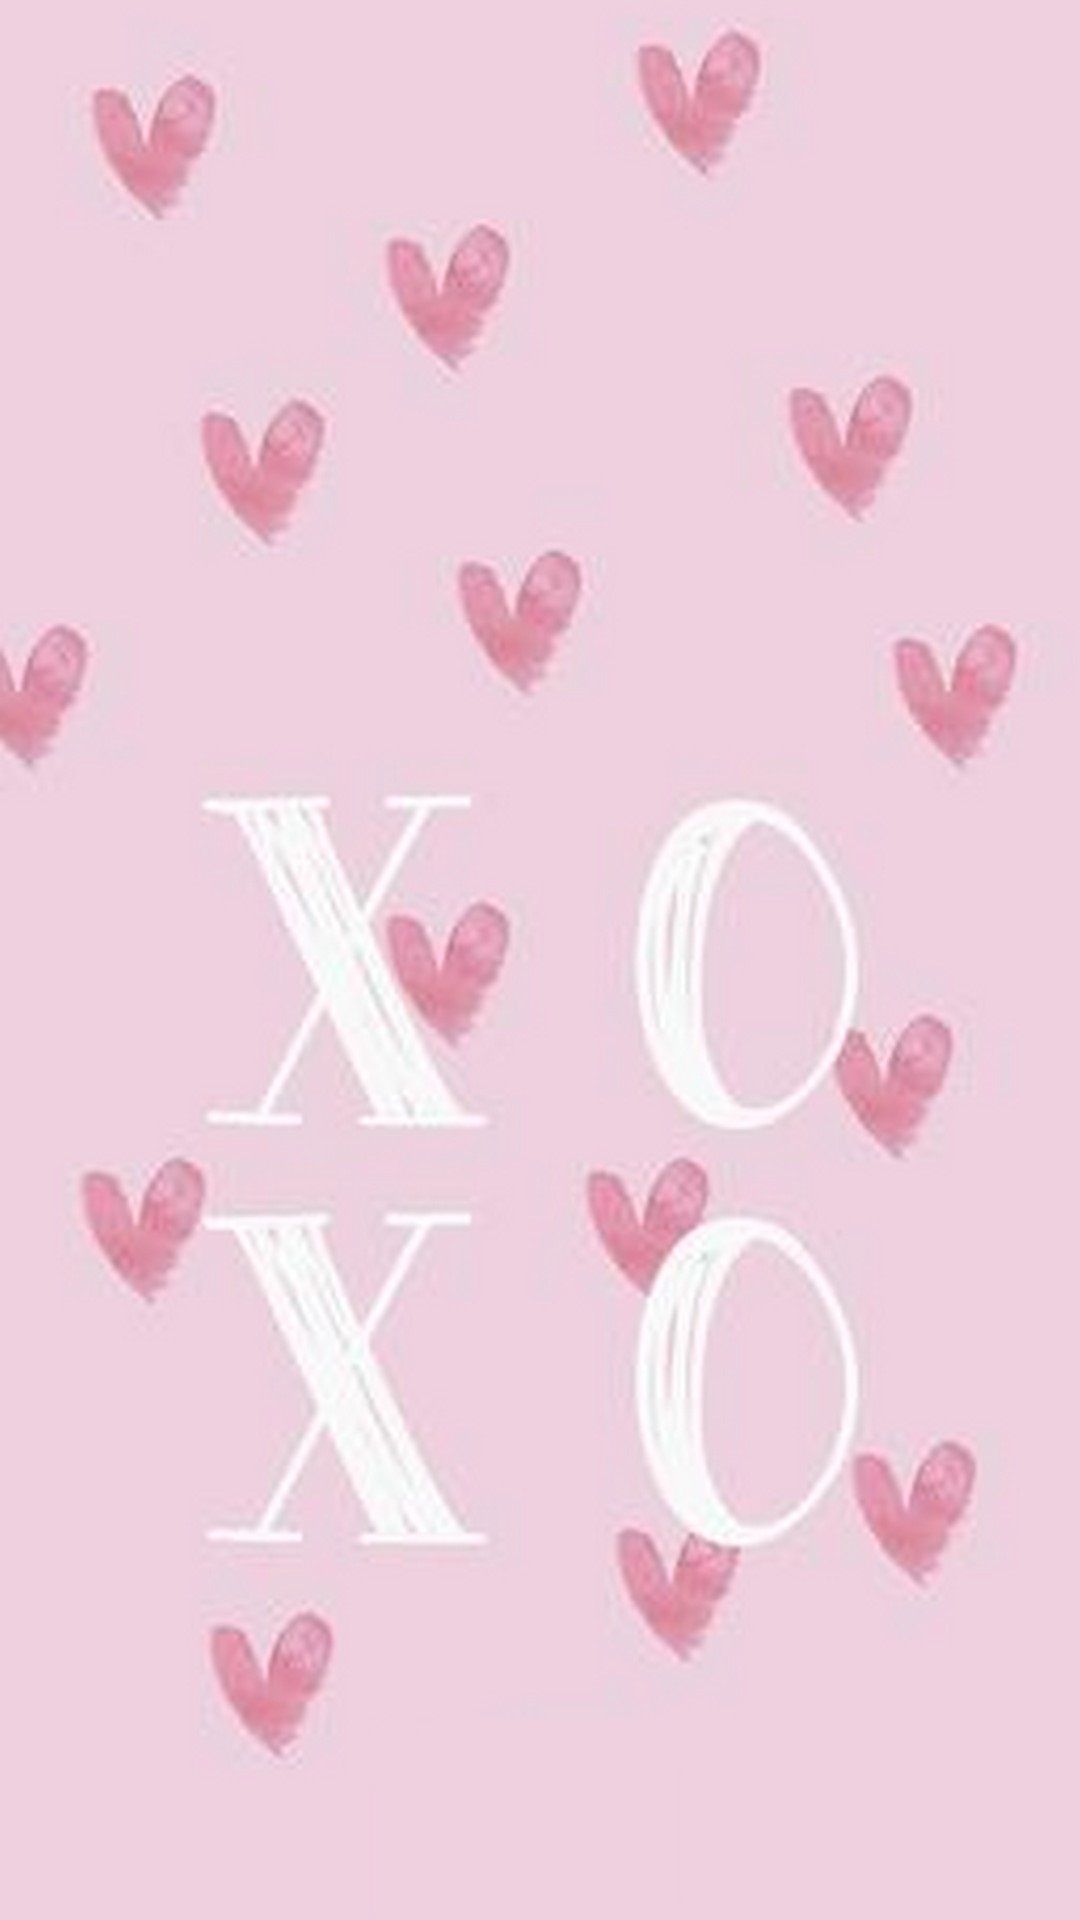 A heart shaped xoxo on pink background - Valentine's Day